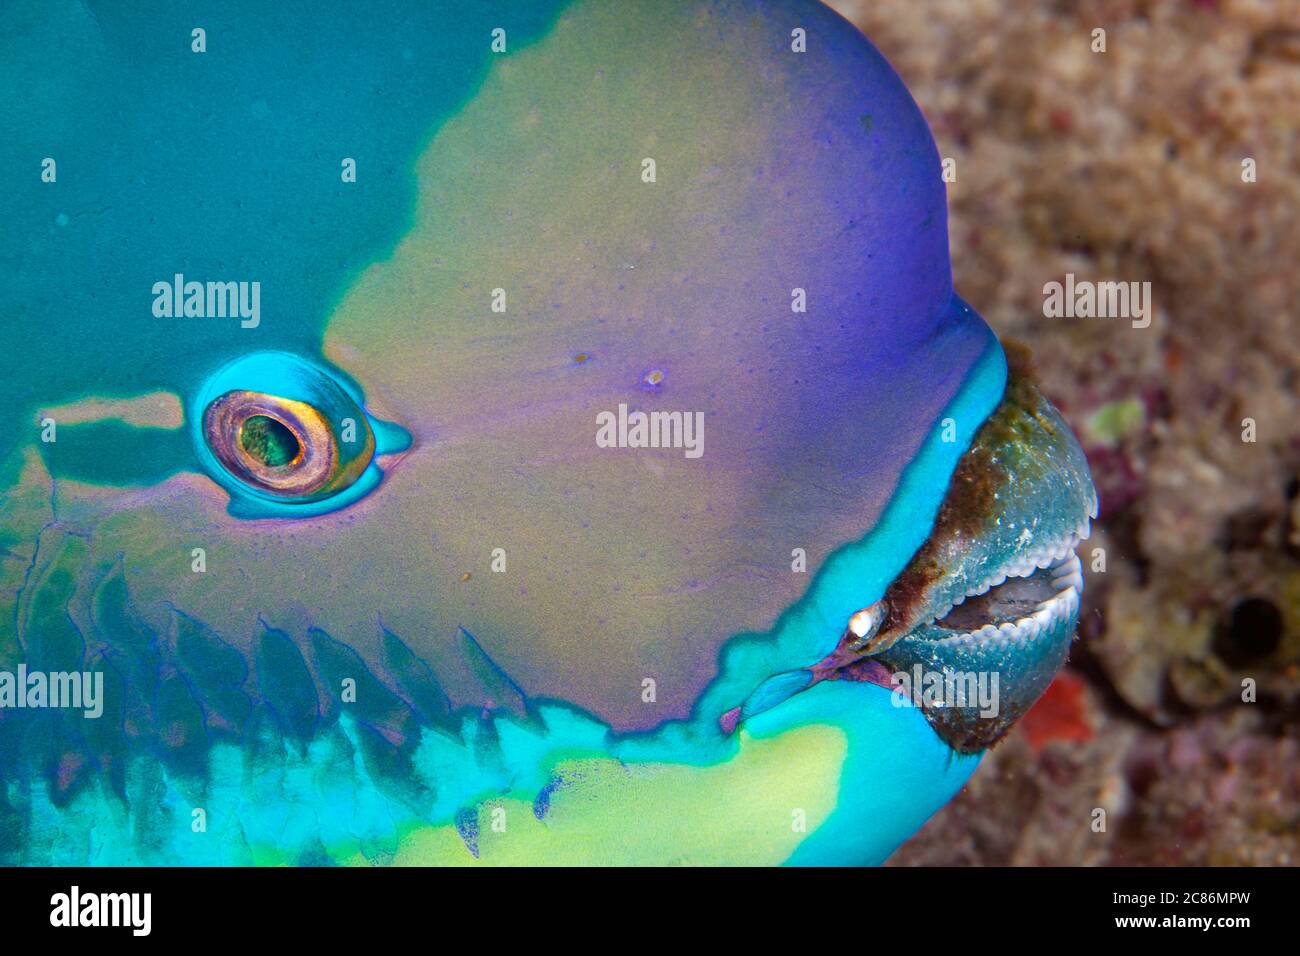 This steephead parrotfish, Chlorurus microrhinos, was photographed at night while it slept in a crevice in the reef, Fiji. Stock Photo